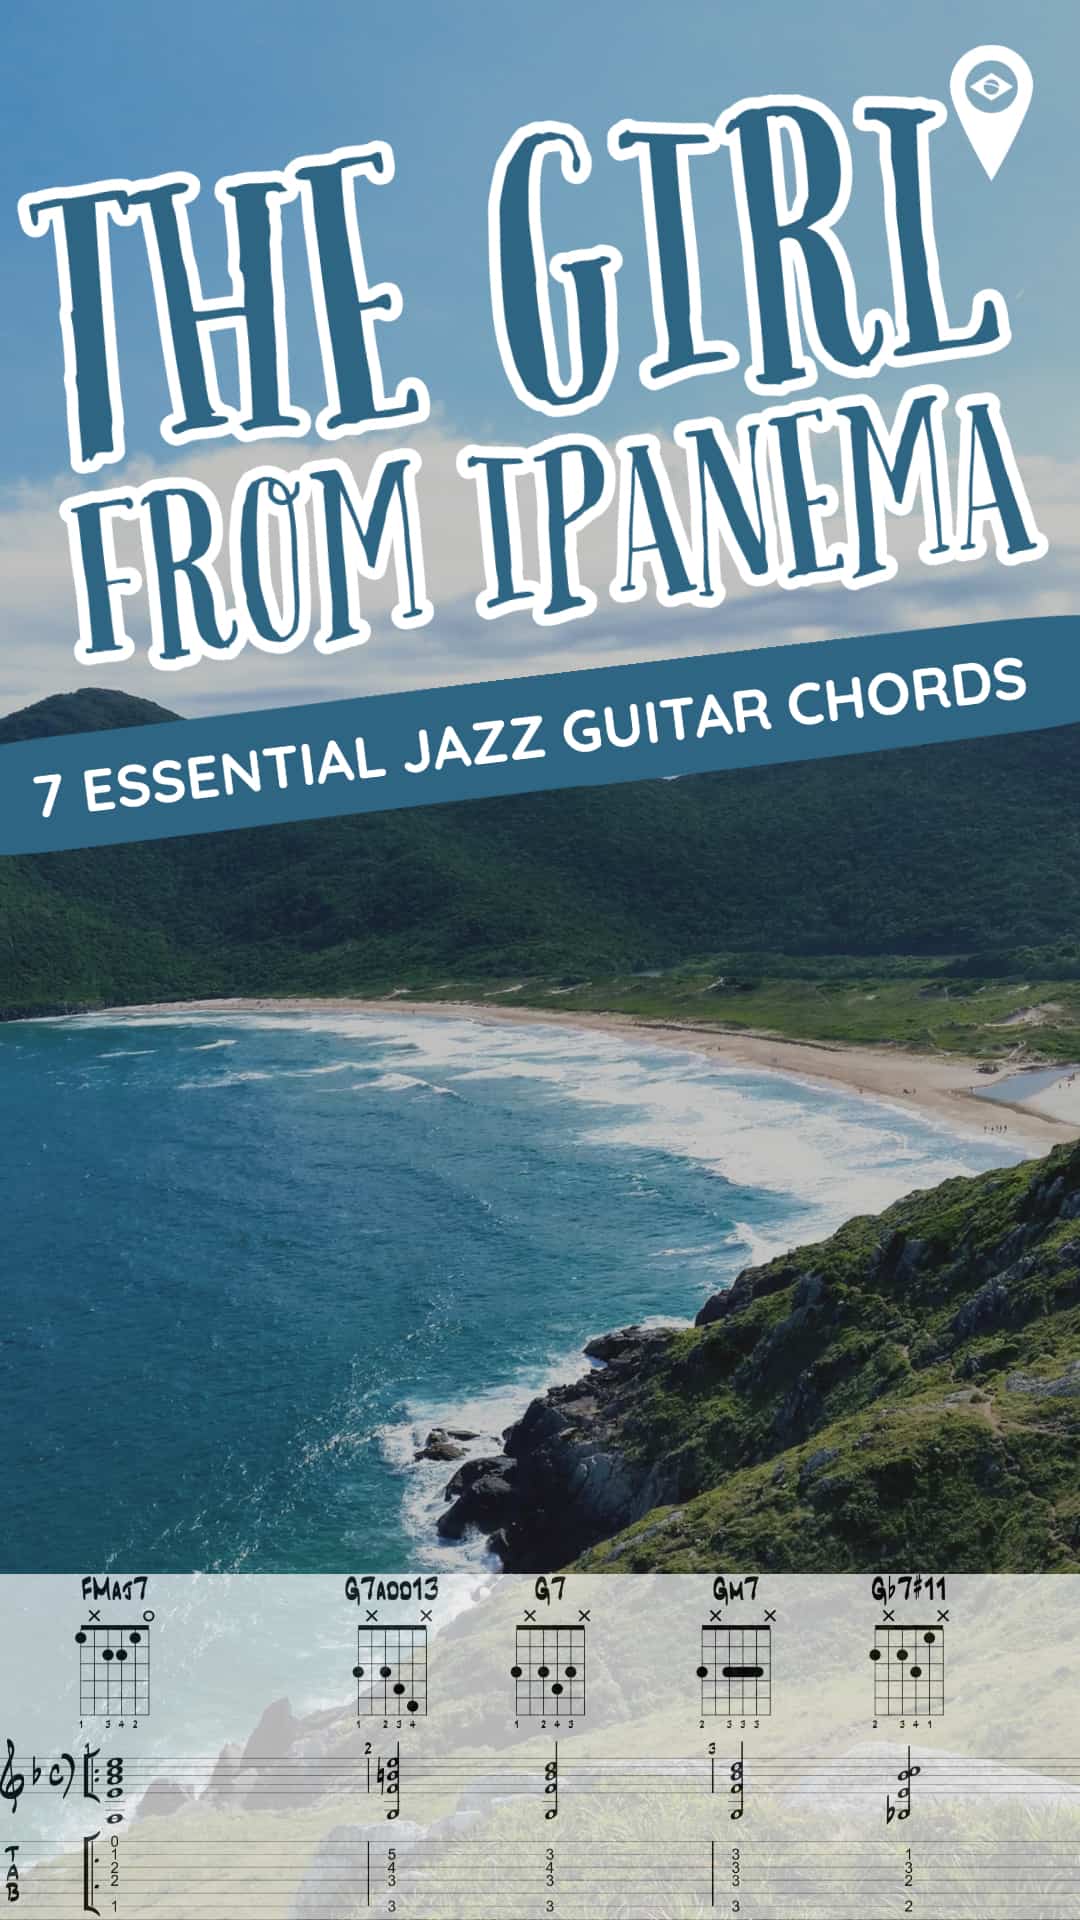 7 Essential Jazz Guitar Chords and Scale Study - The Girl From Ipanema